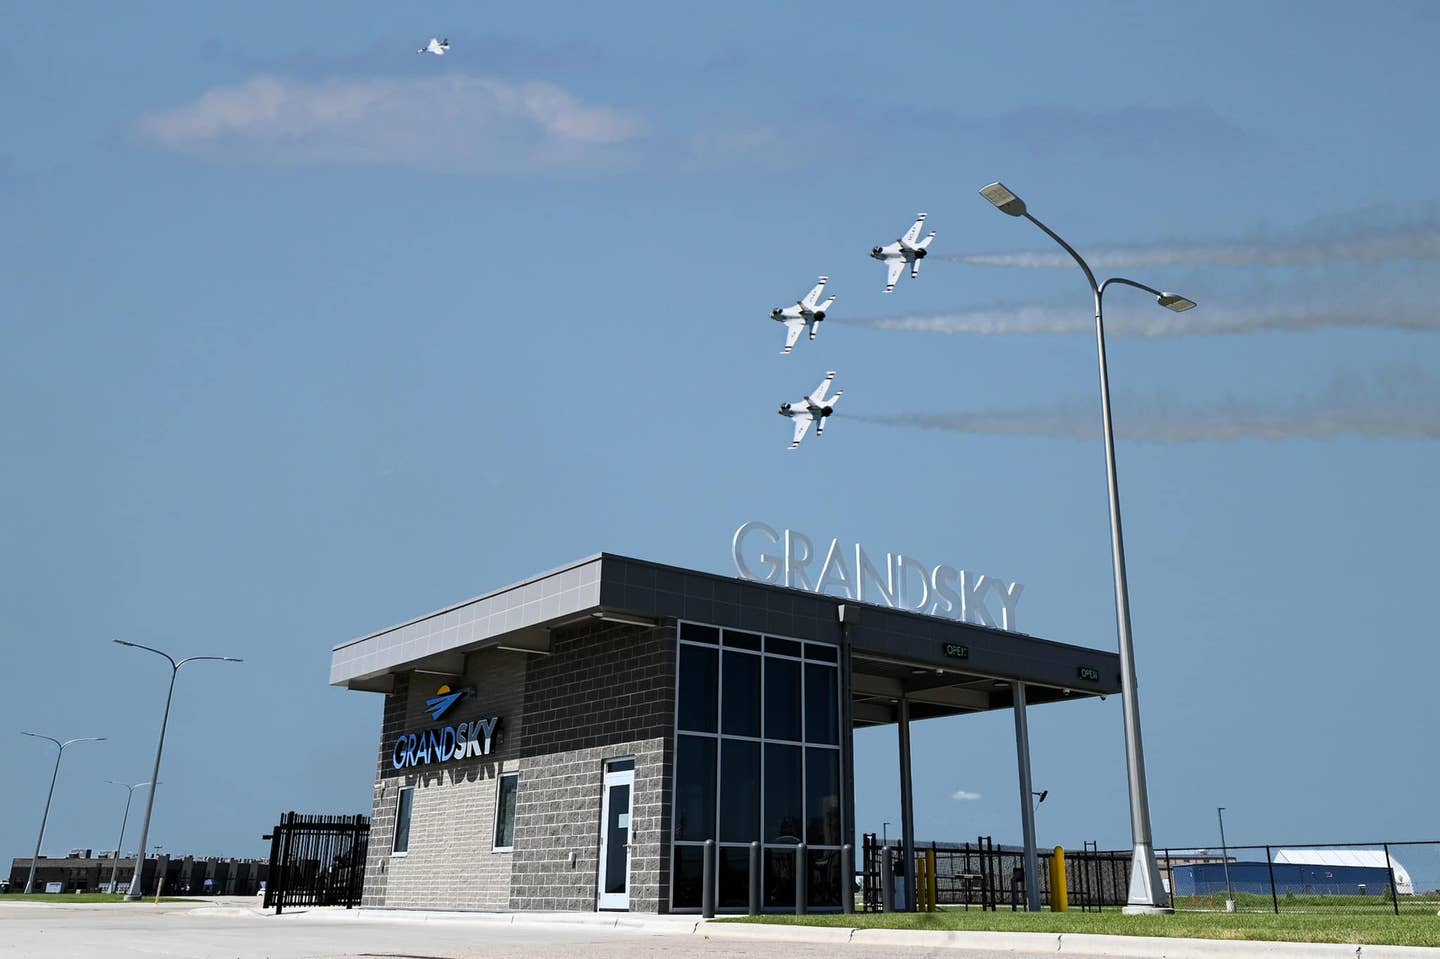 Entrance to the Grand Sky testing facility in North Dakota where all retired Block 20 and Block 30 RQ-4 Global Hawks will be housed. <em>Credit: Grand Sky</em>